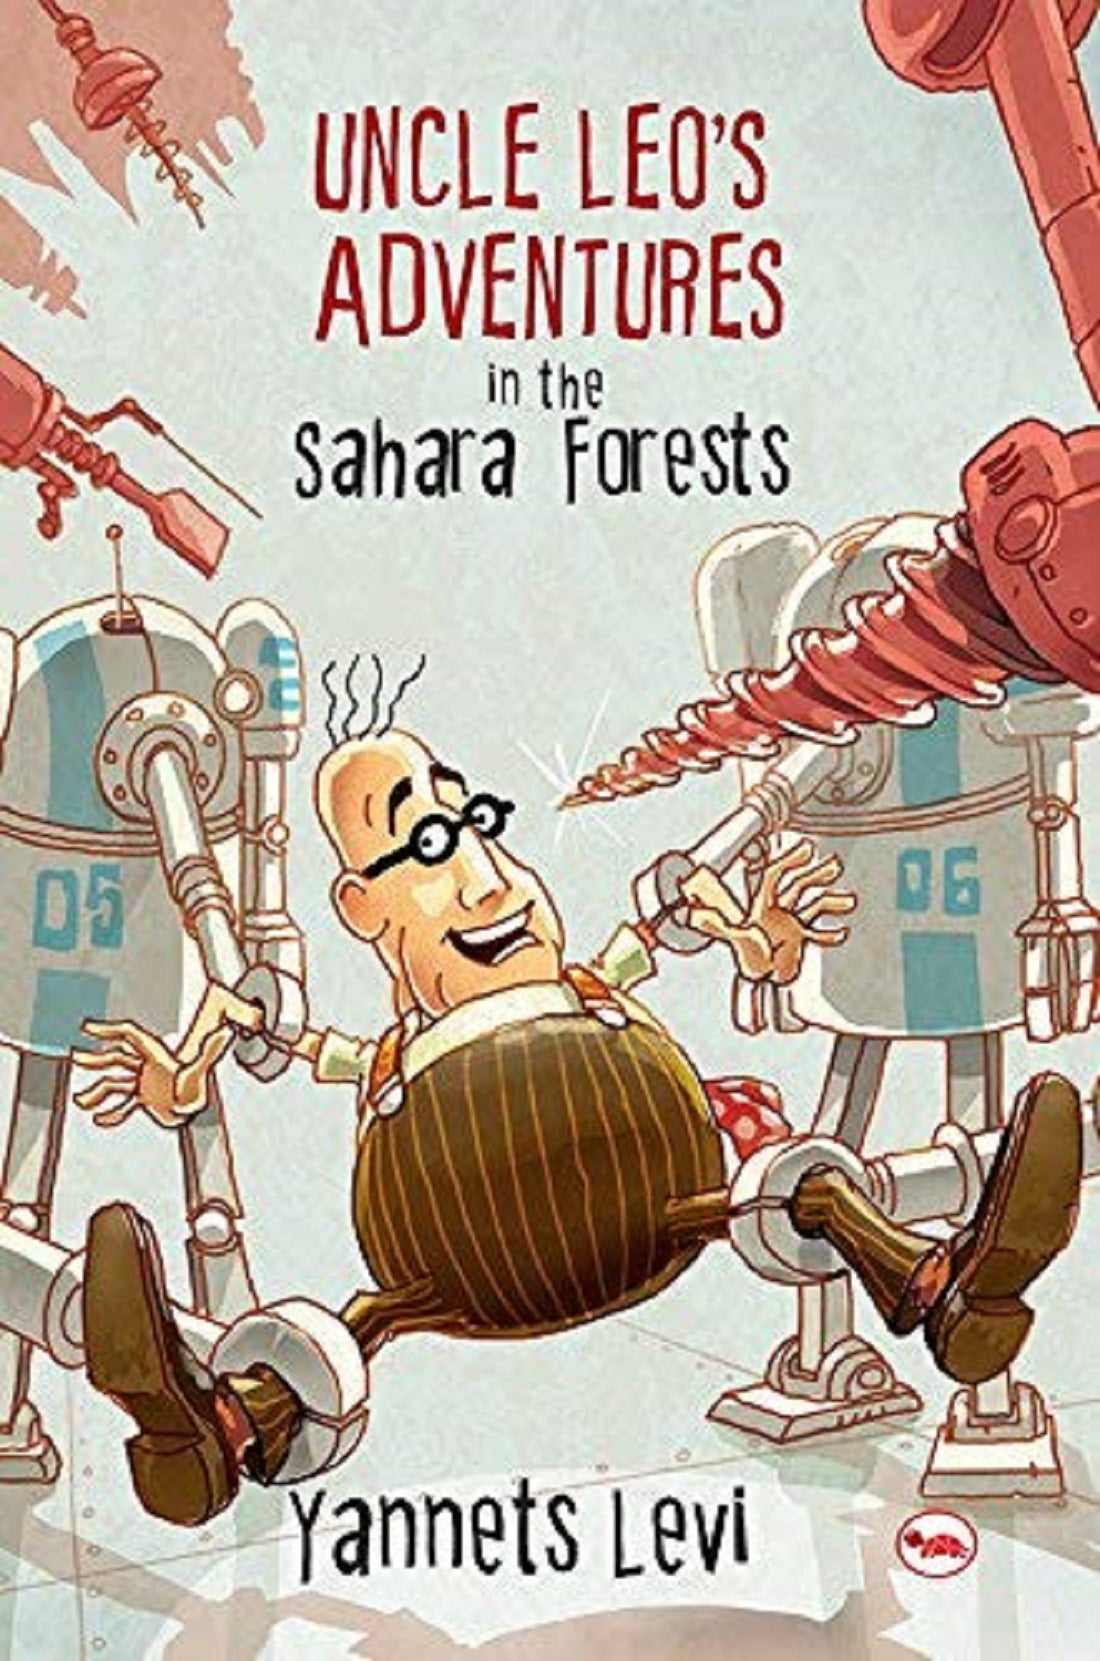 UNCLE LEO'S ADVENTURES IN SAHARA FORESTS